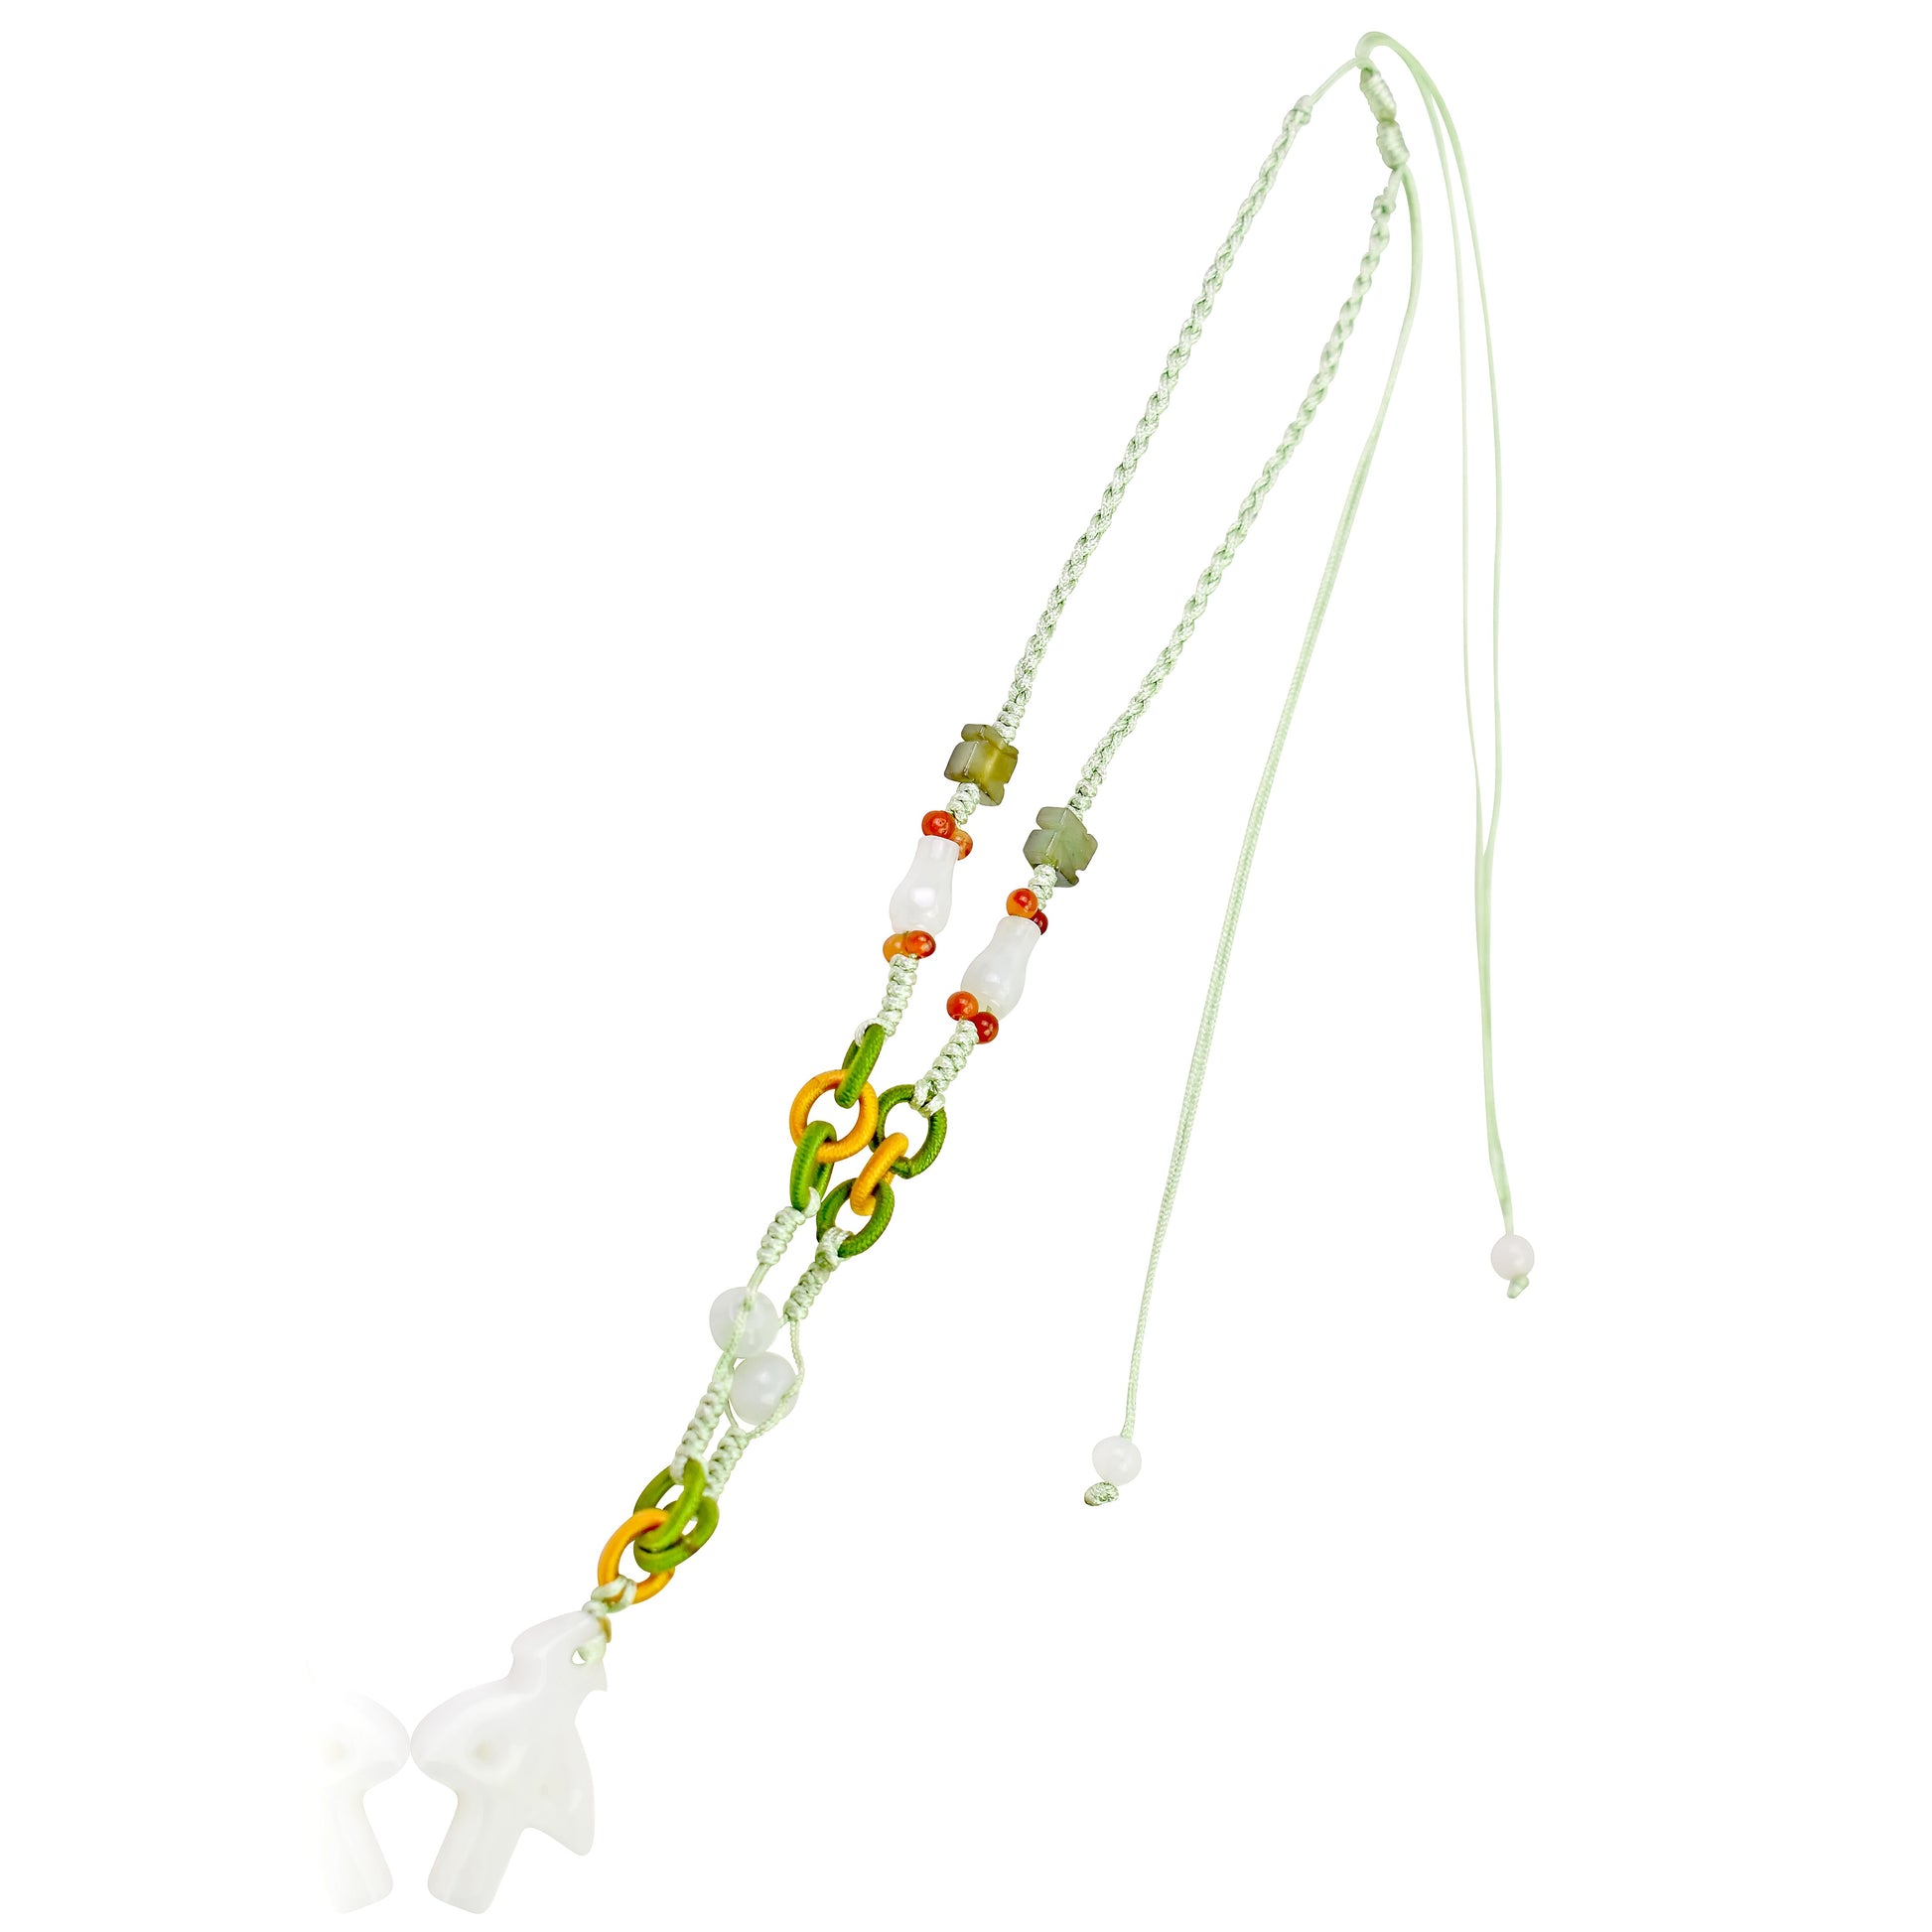 Let Your Sagittarius Side Shine with a Handmade Jade Necklace made with Sea Green Cord